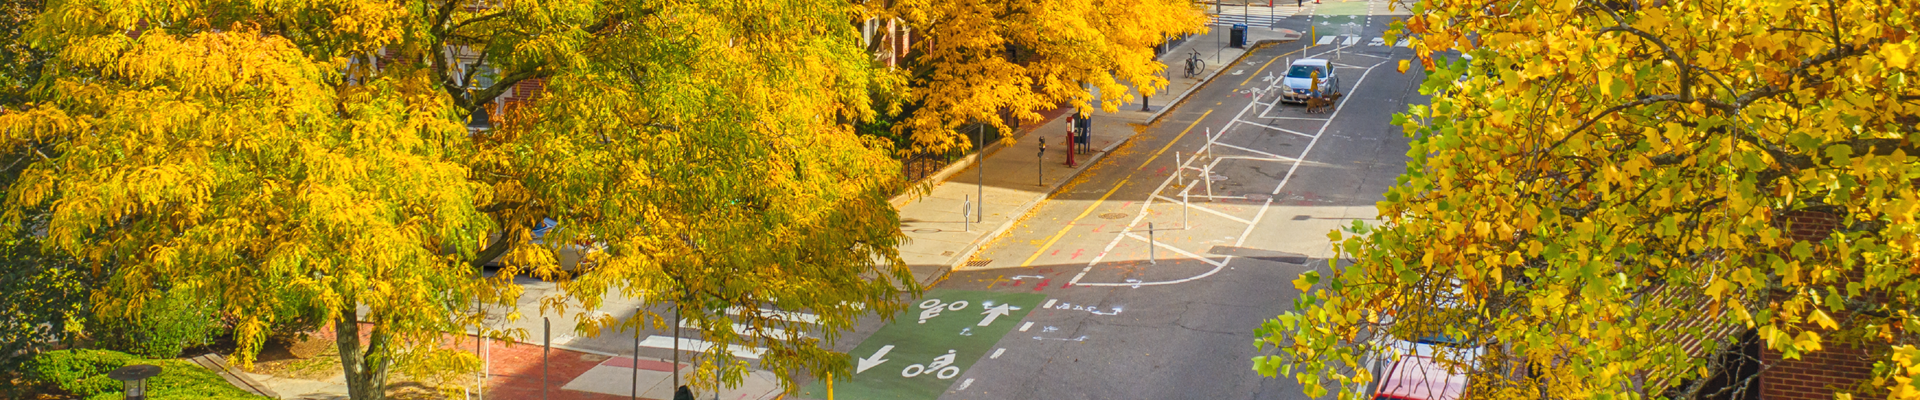 An aerial view of a two-way separated bike lane on Brattle Street. Most of the area on the left and the right of the image is filled with trees with yellow and green leaves.